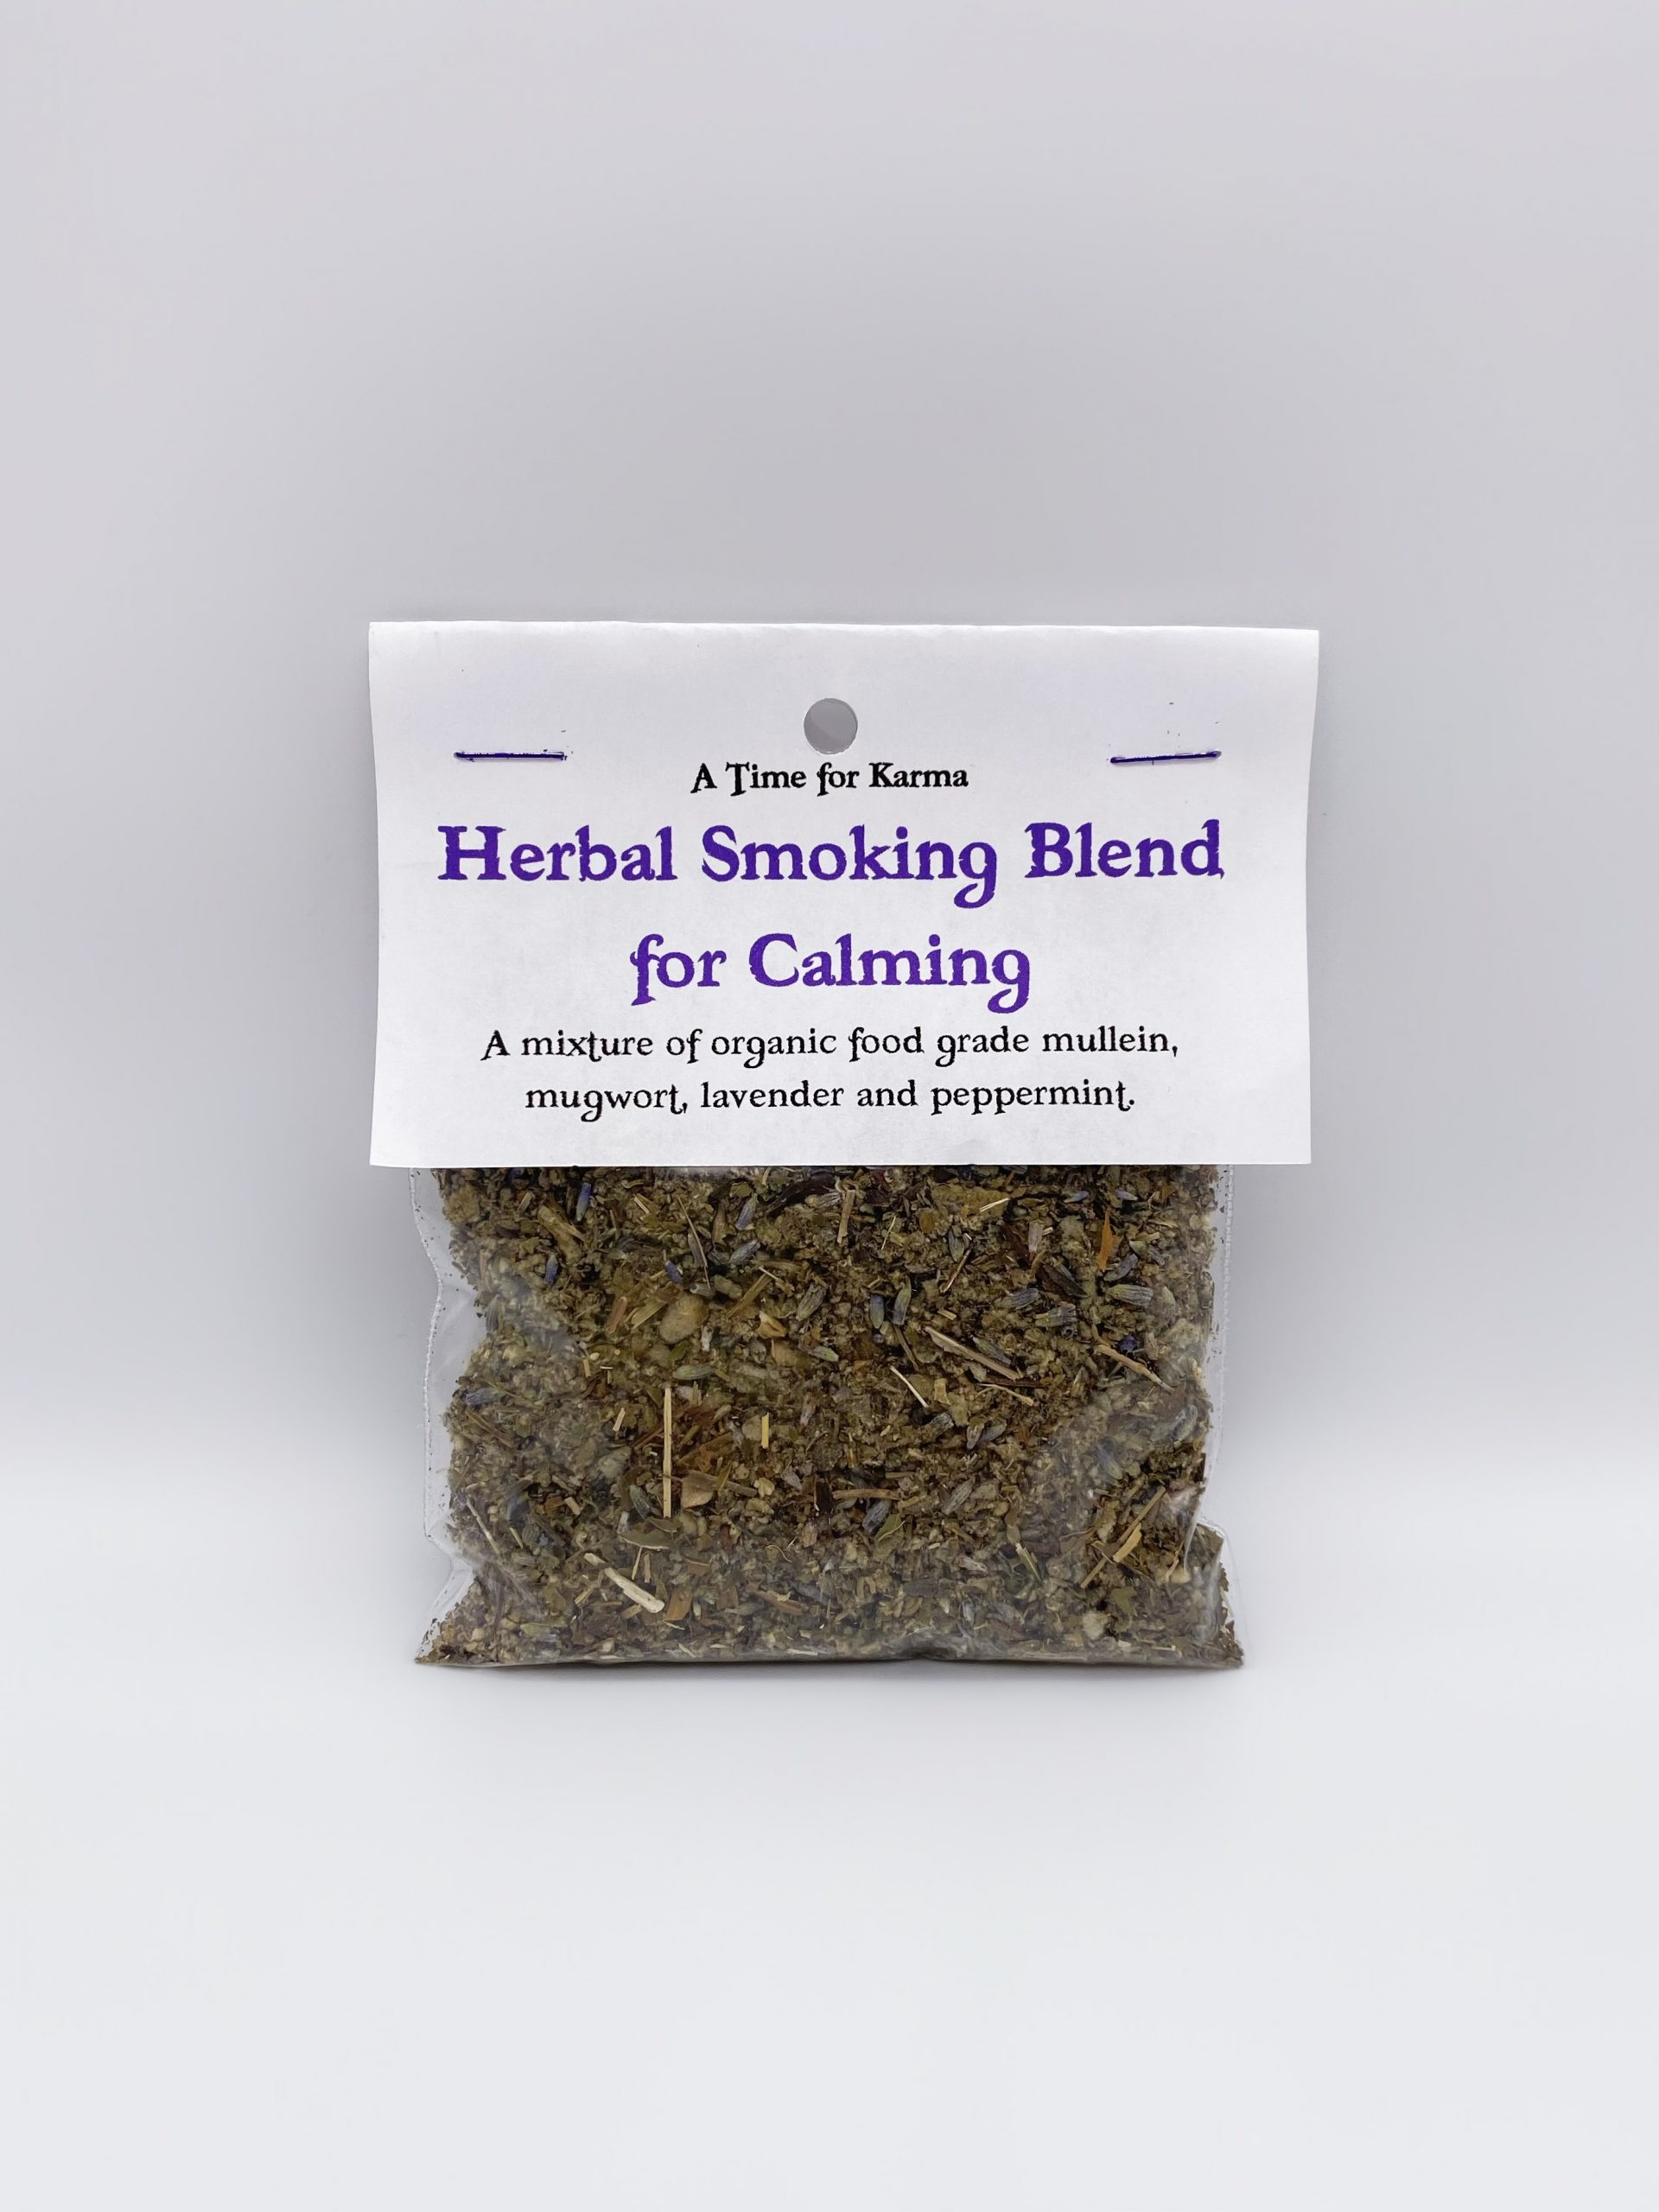 12 Smokable Herbs + Creating Your Own Blend – Euphoric Herbals